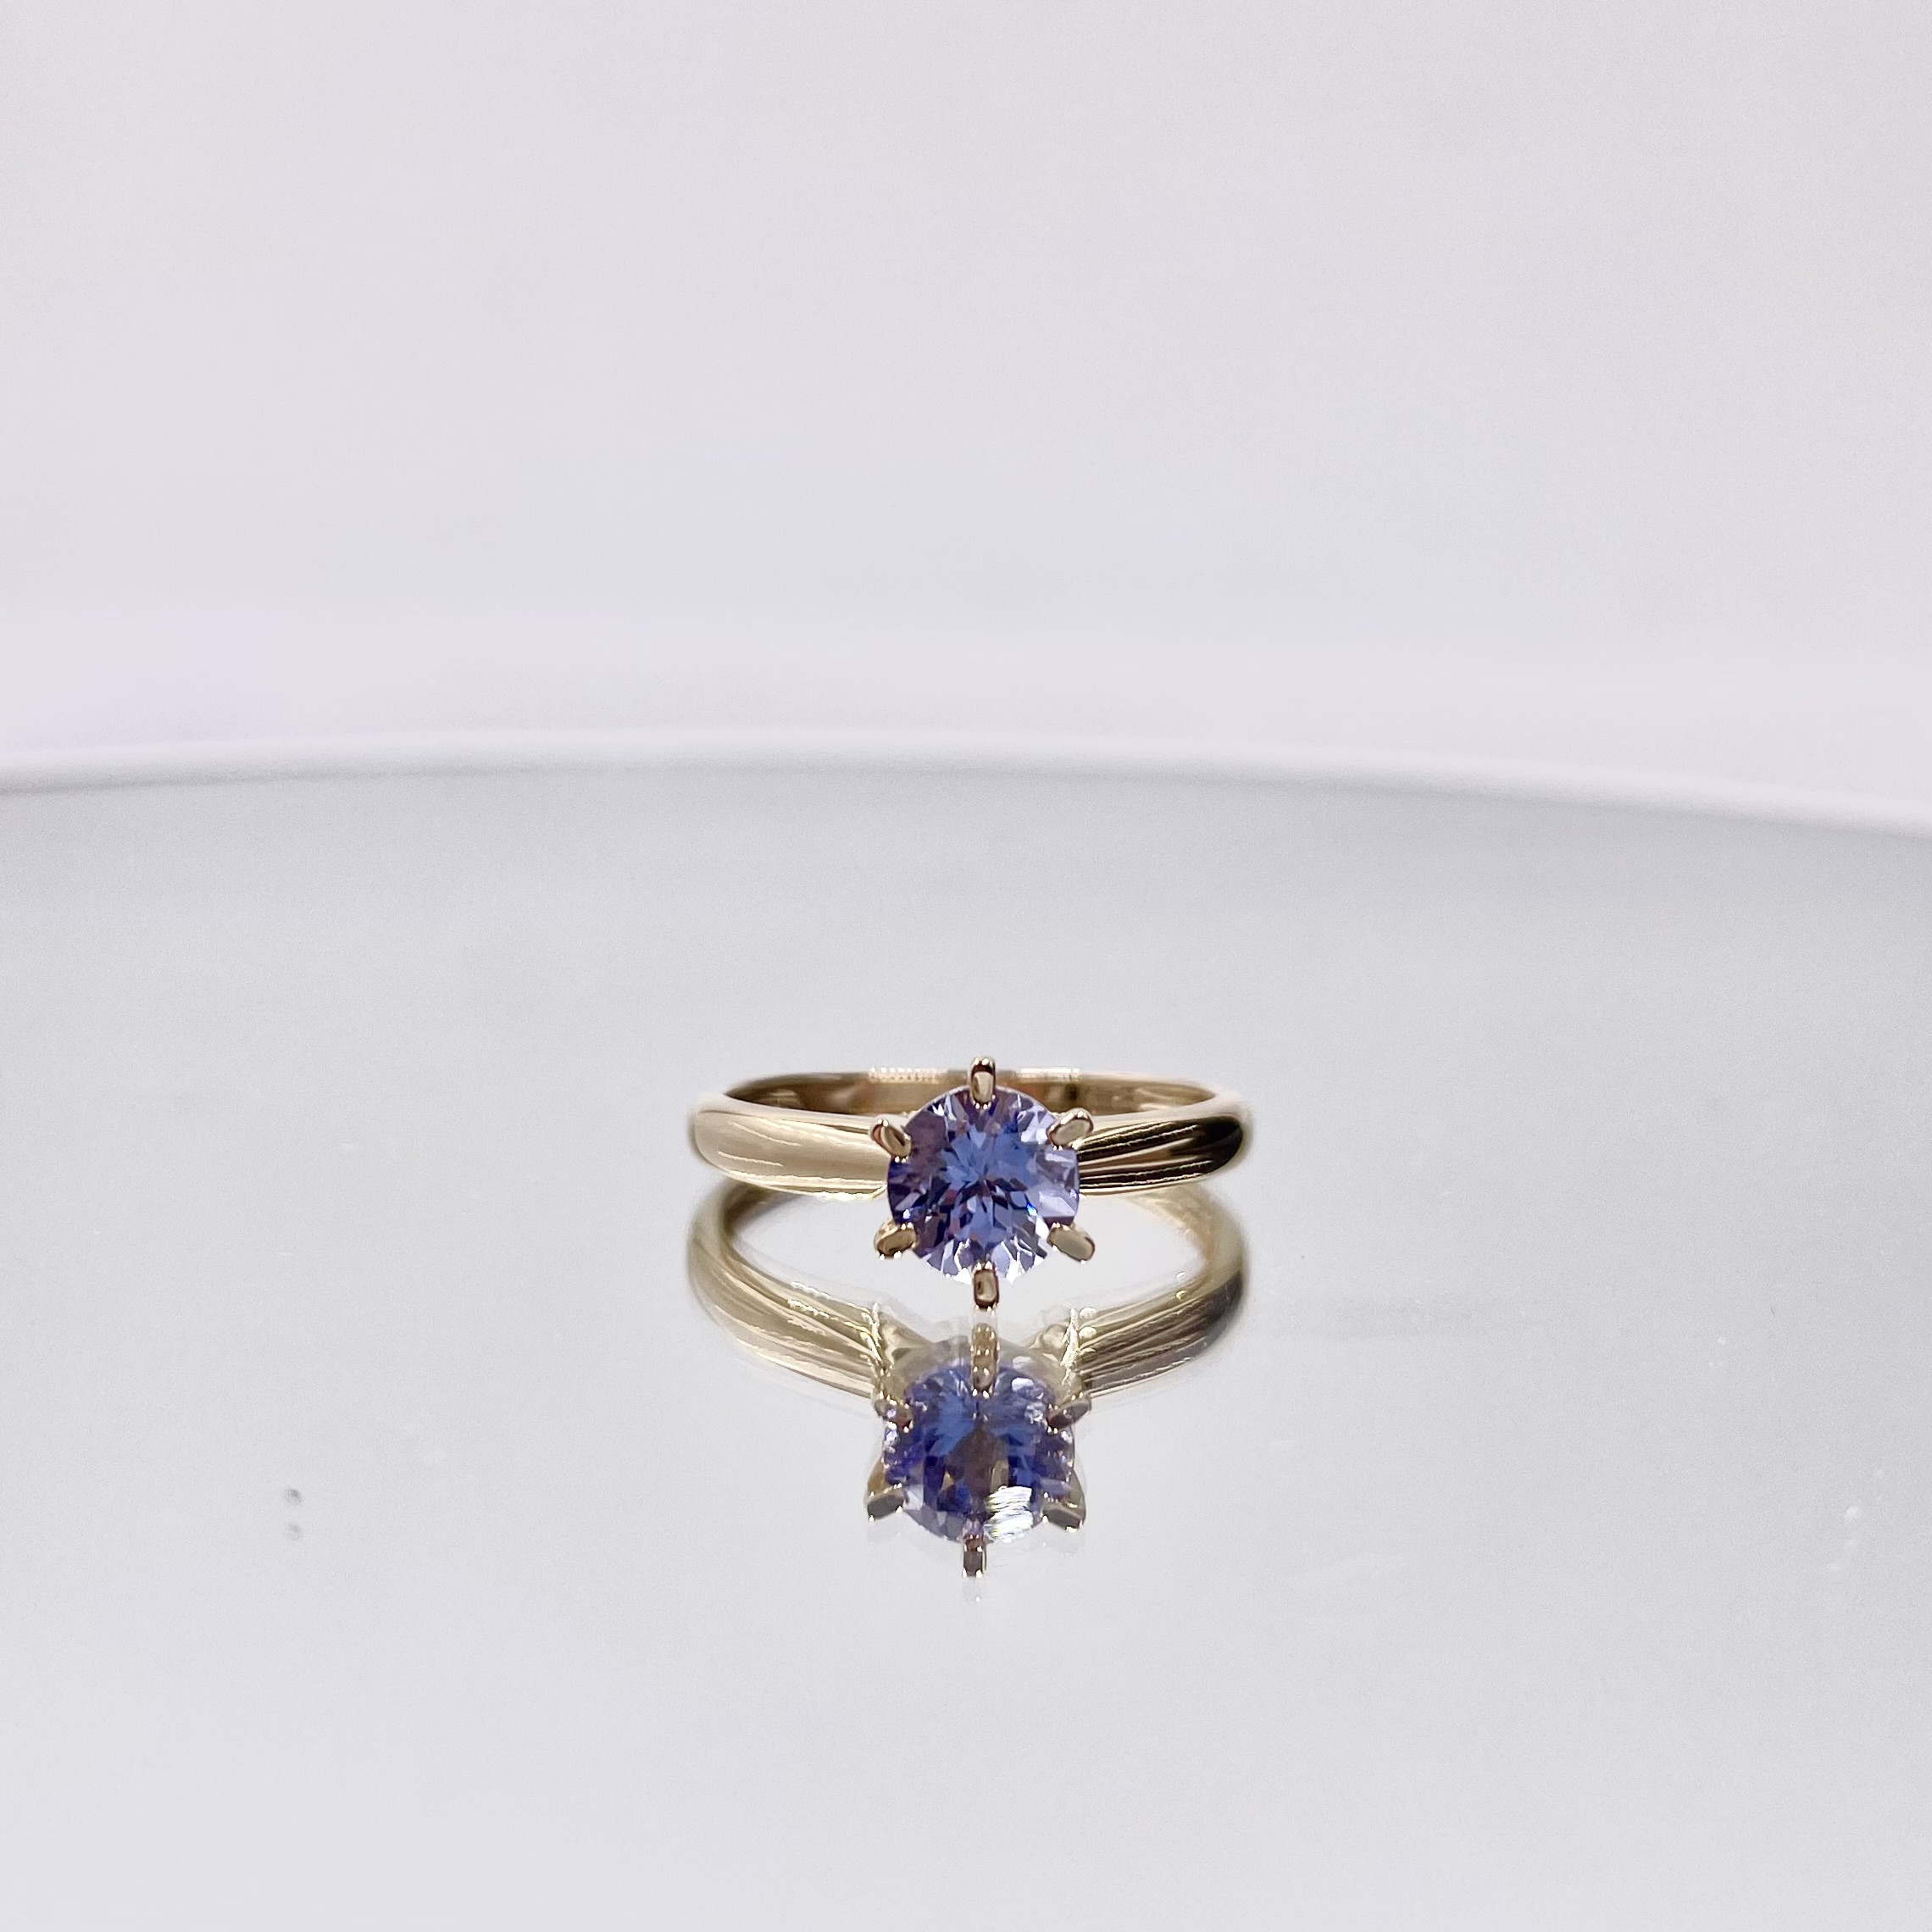 0.8ct 6.0mm Round Cut Natural Tanzanite Six Claw Wedding Ring in 14k Solid Yellow Gold with Gemstone Featured Image